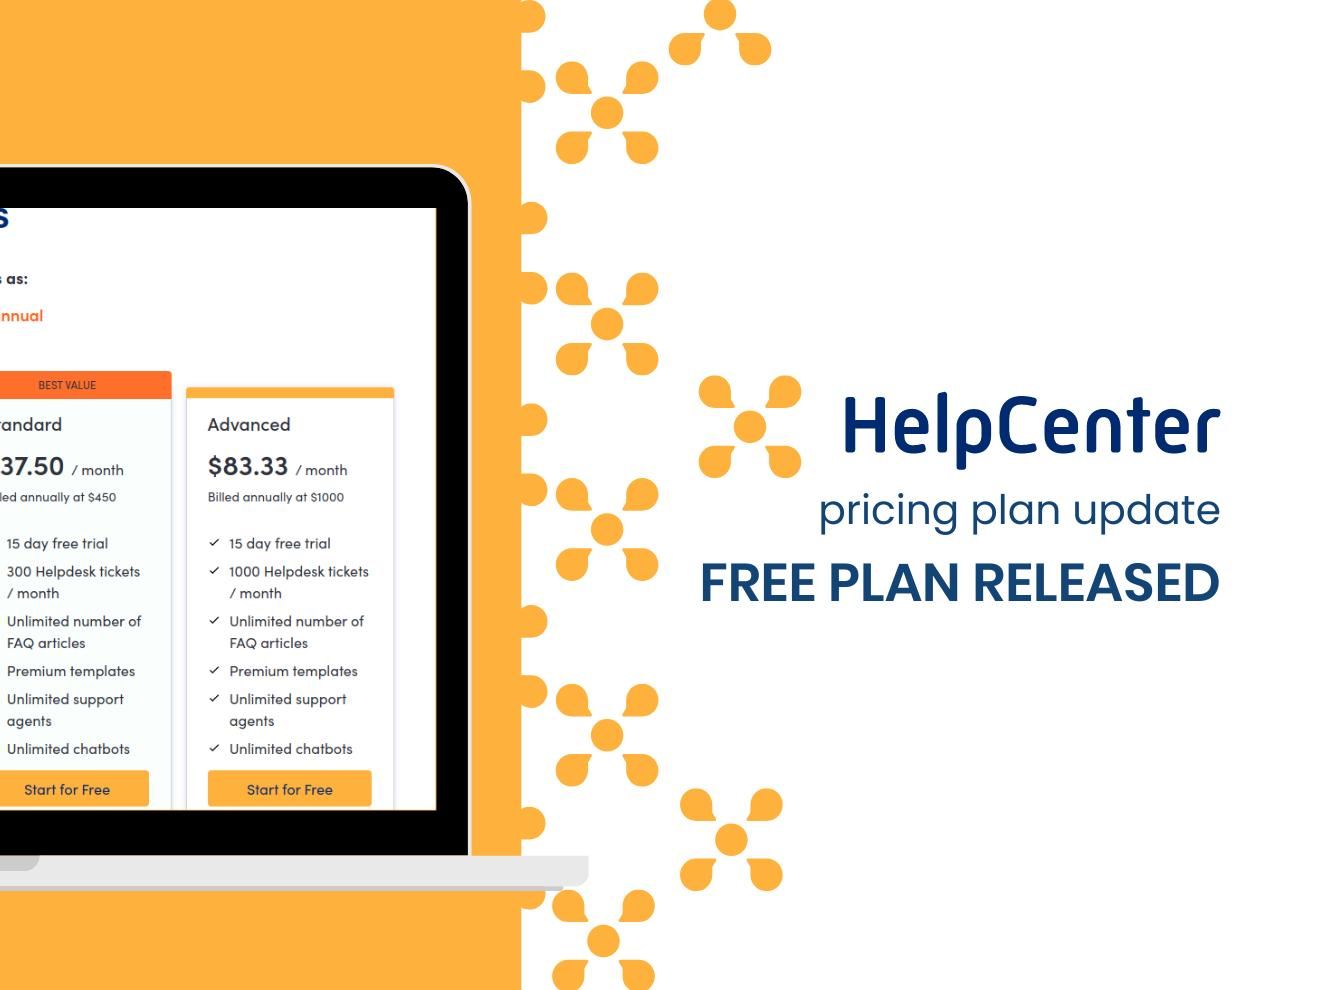 New: HelpCenter Pricing Plan Updates Find Out New Free Plan